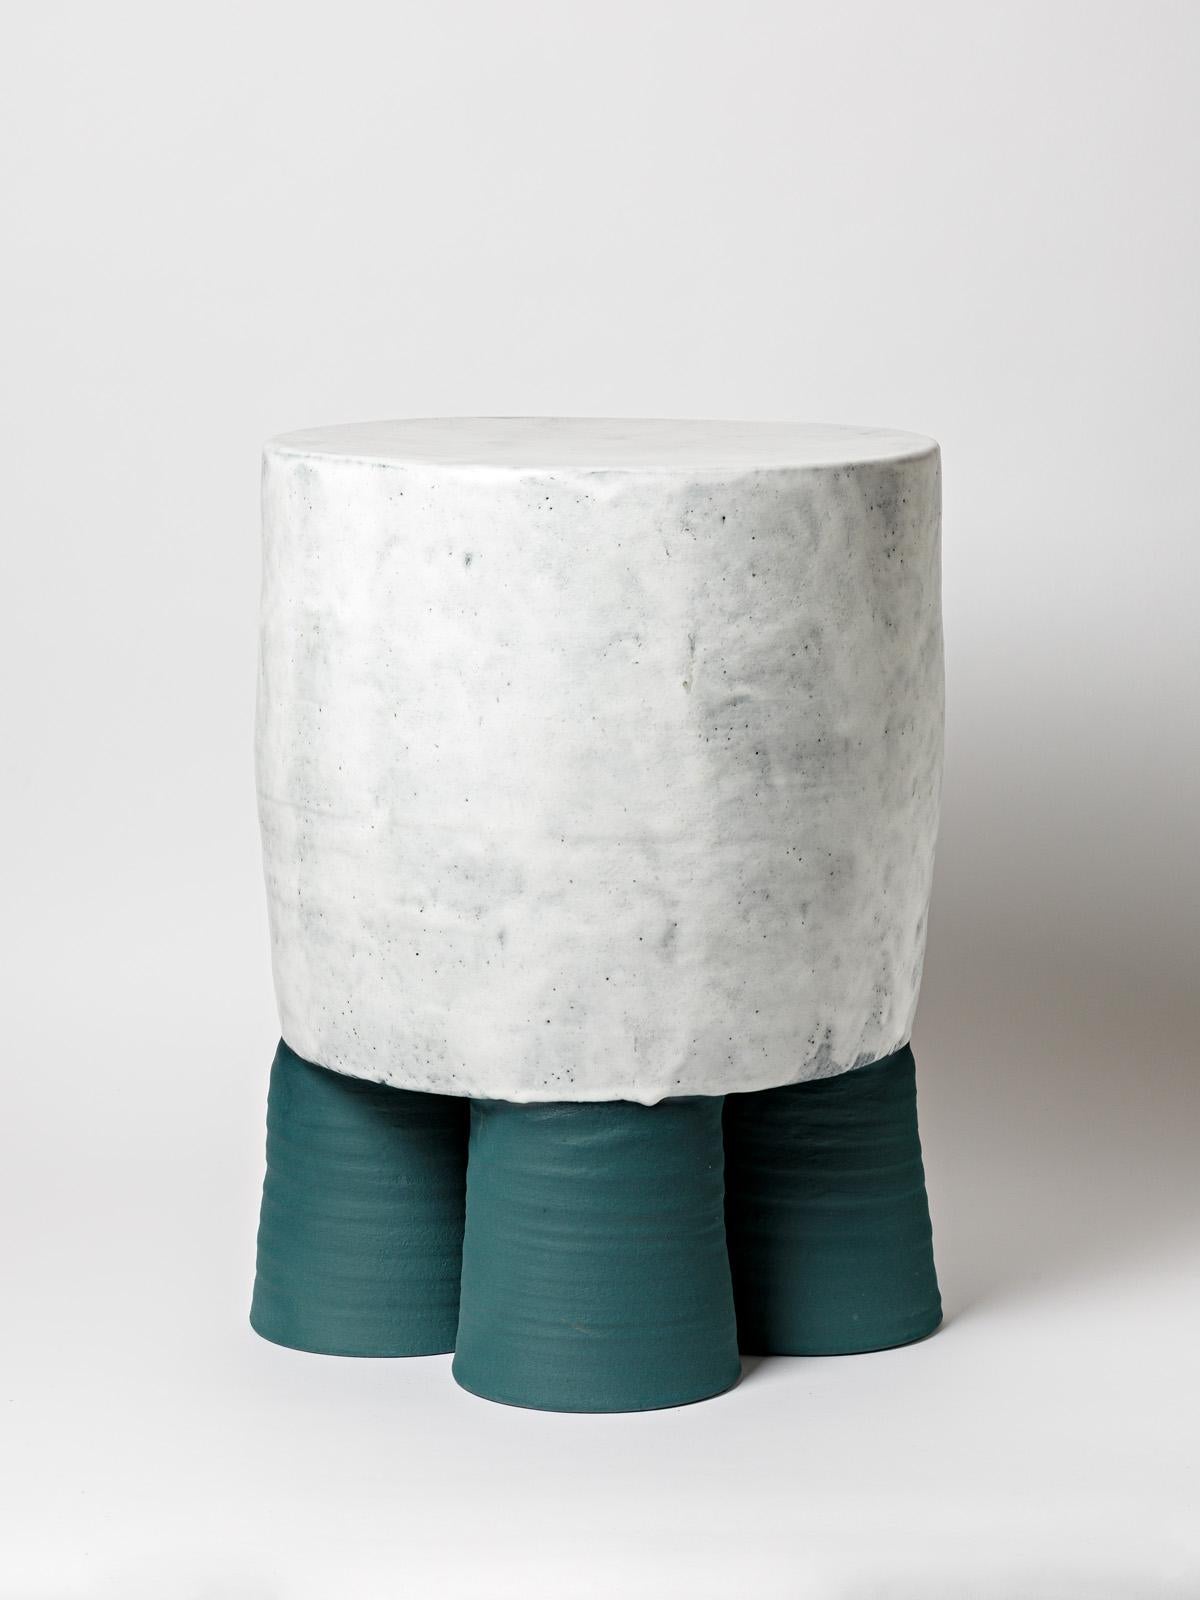 Contemporary Ceramic Stool or Table with Glazes Decoration by Mia Jensen, circa 2022 For Sale